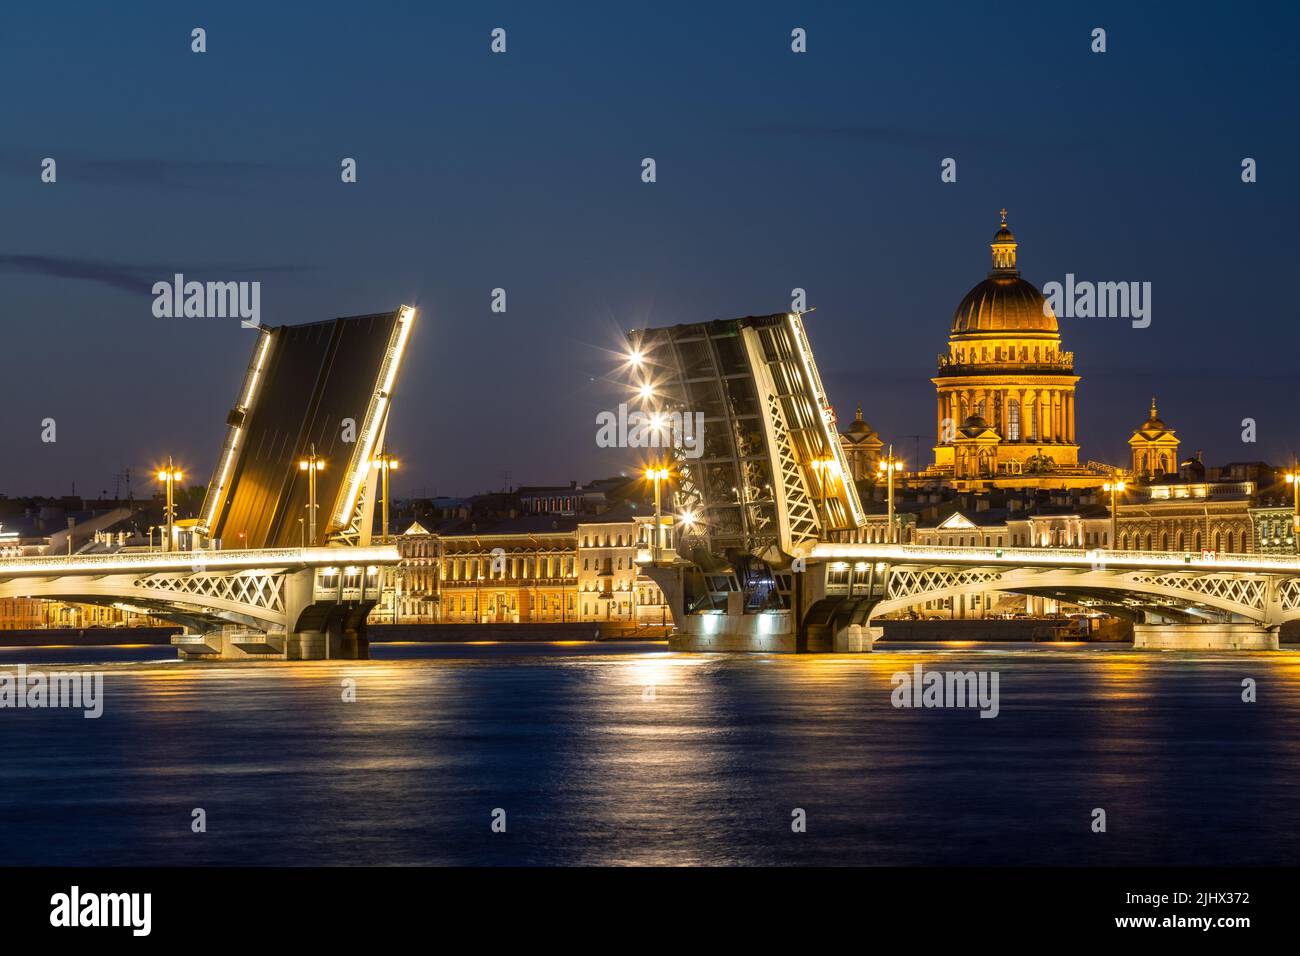 White nights in St. Petersburg. St. Isaac's Cathedral and the divorced Annunciation Bridge. Beautiful night cityscape Stock Photo